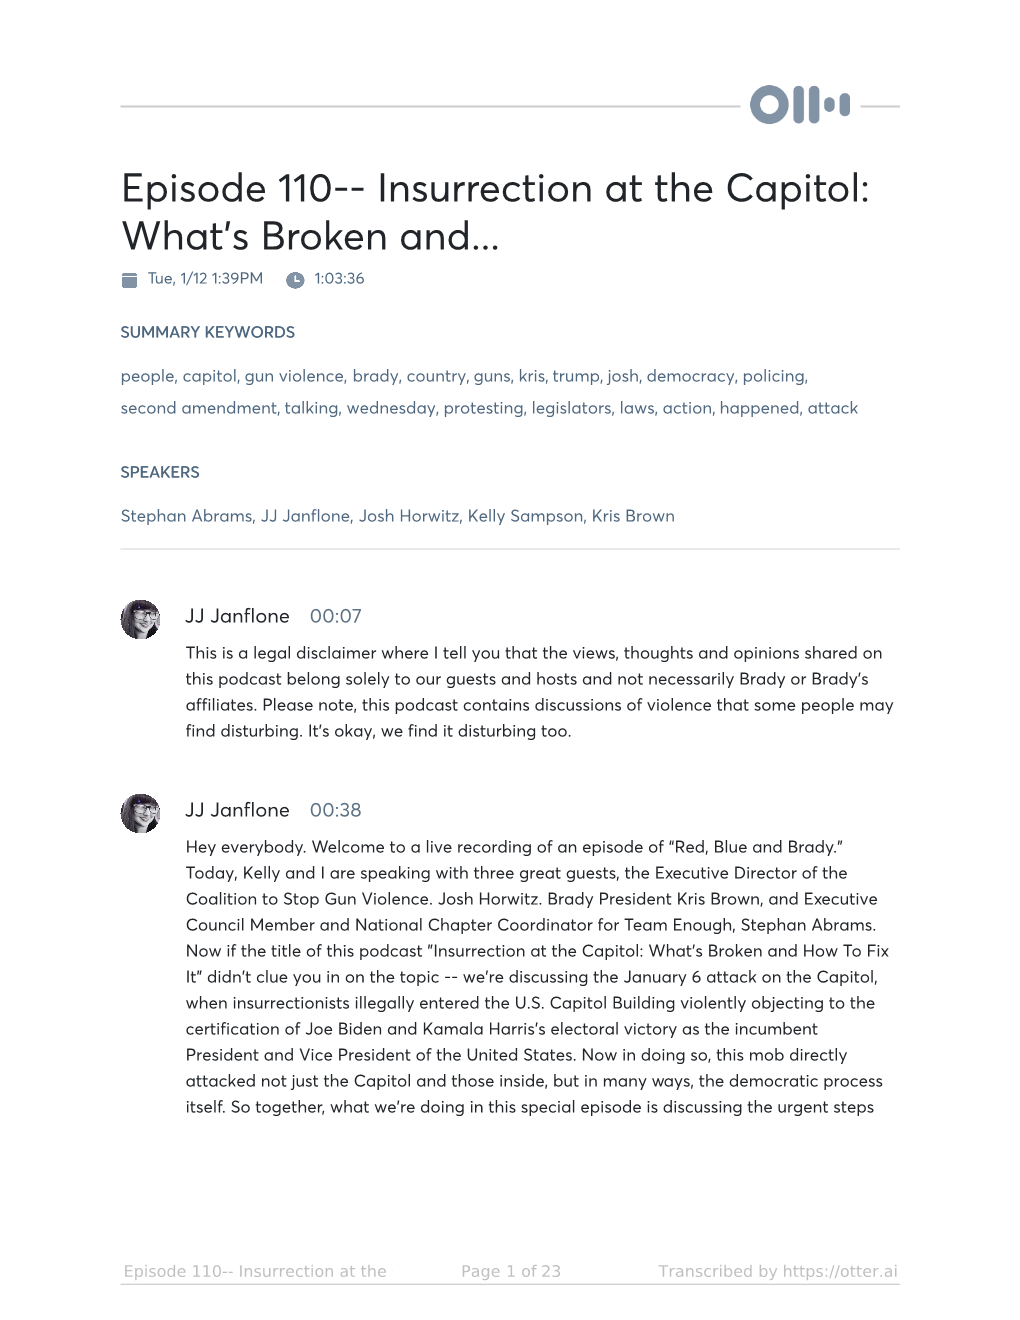 Episode 110-- Insurrection at the Capitol: What’S Broken And